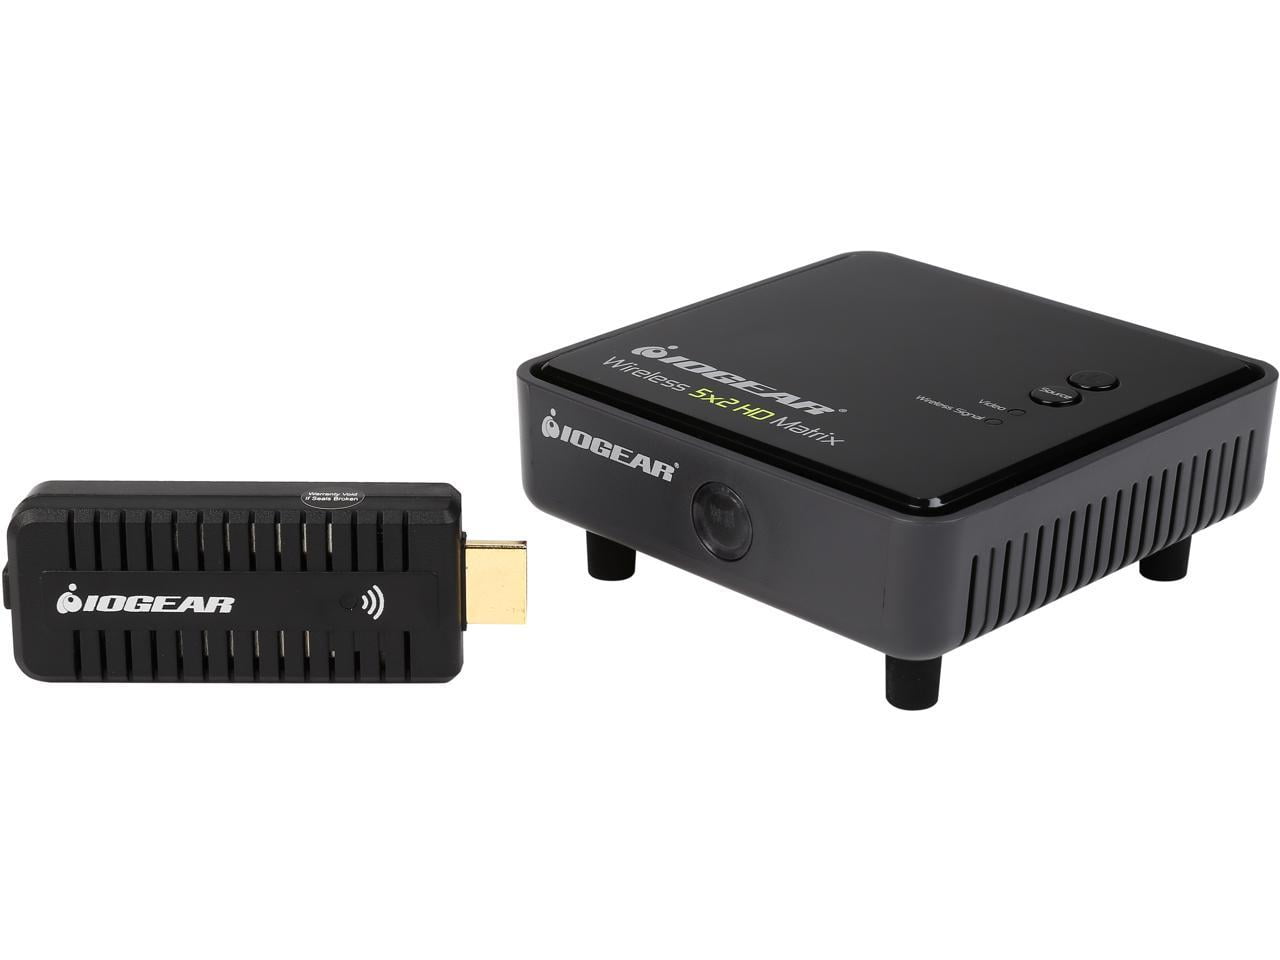 Brutal paraply Ministerium Hdmi Bluetooth Adapter Tv